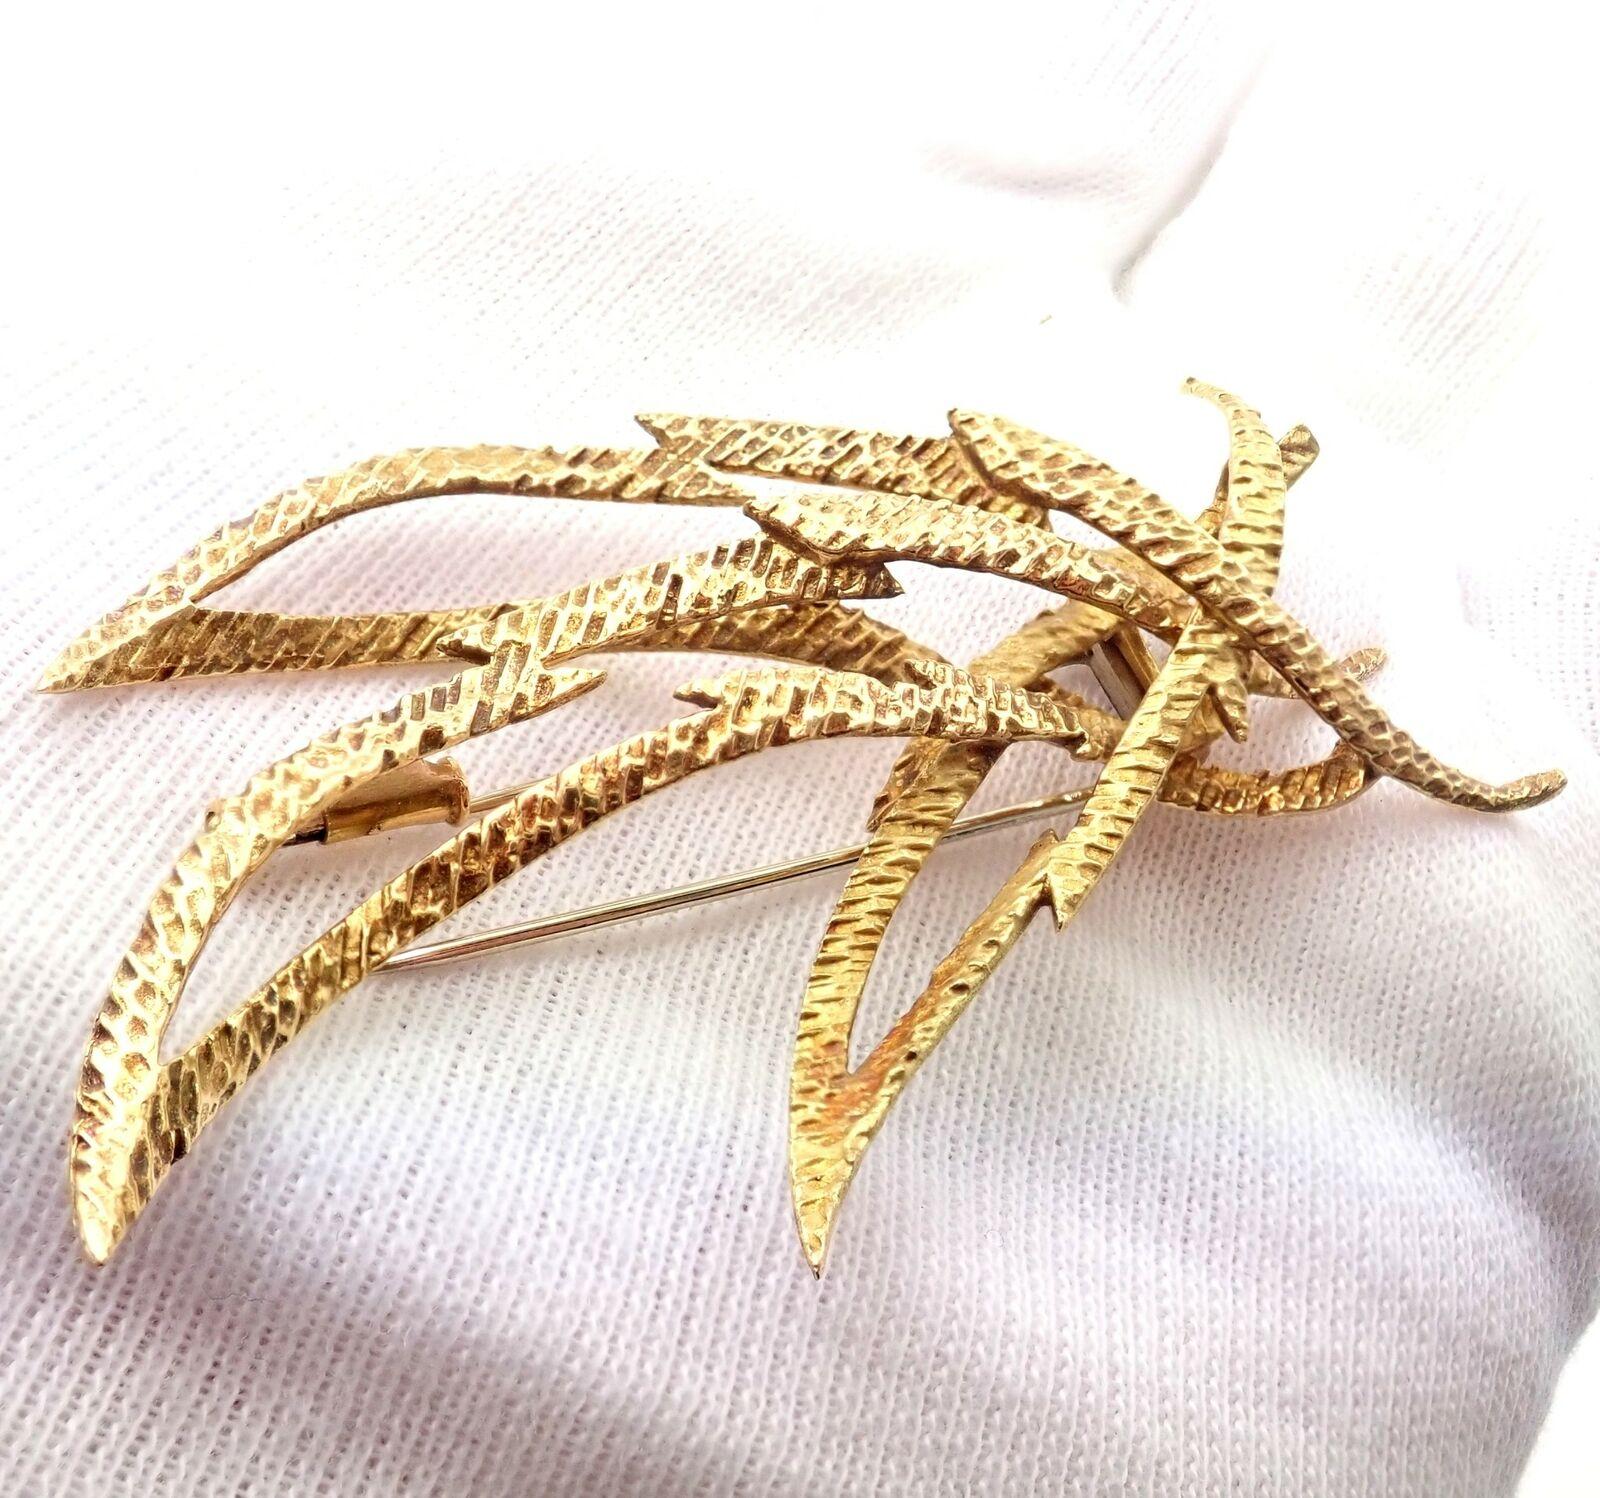 Hermes Paris Vintage Yellow Gold Starburst Comet Brooch In Excellent Condition For Sale In Holland, PA